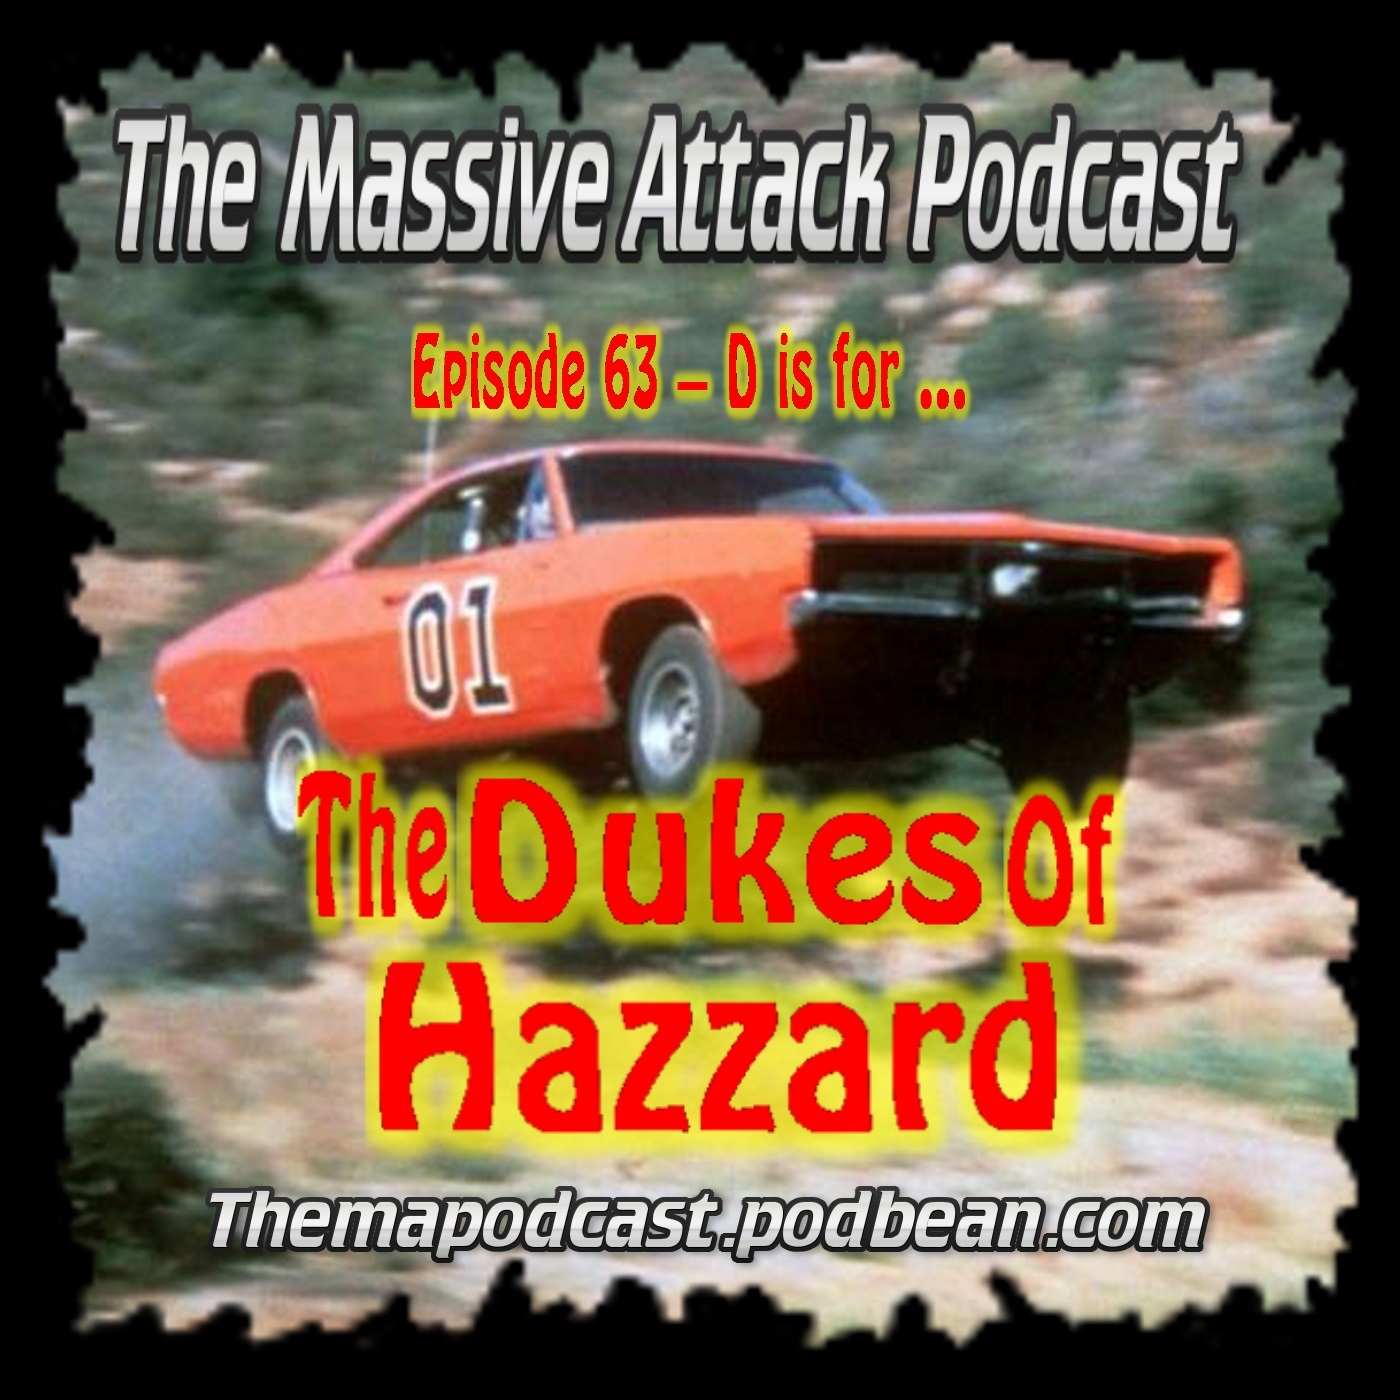 Episode 63 - D is for The Dukes of Hazzard!